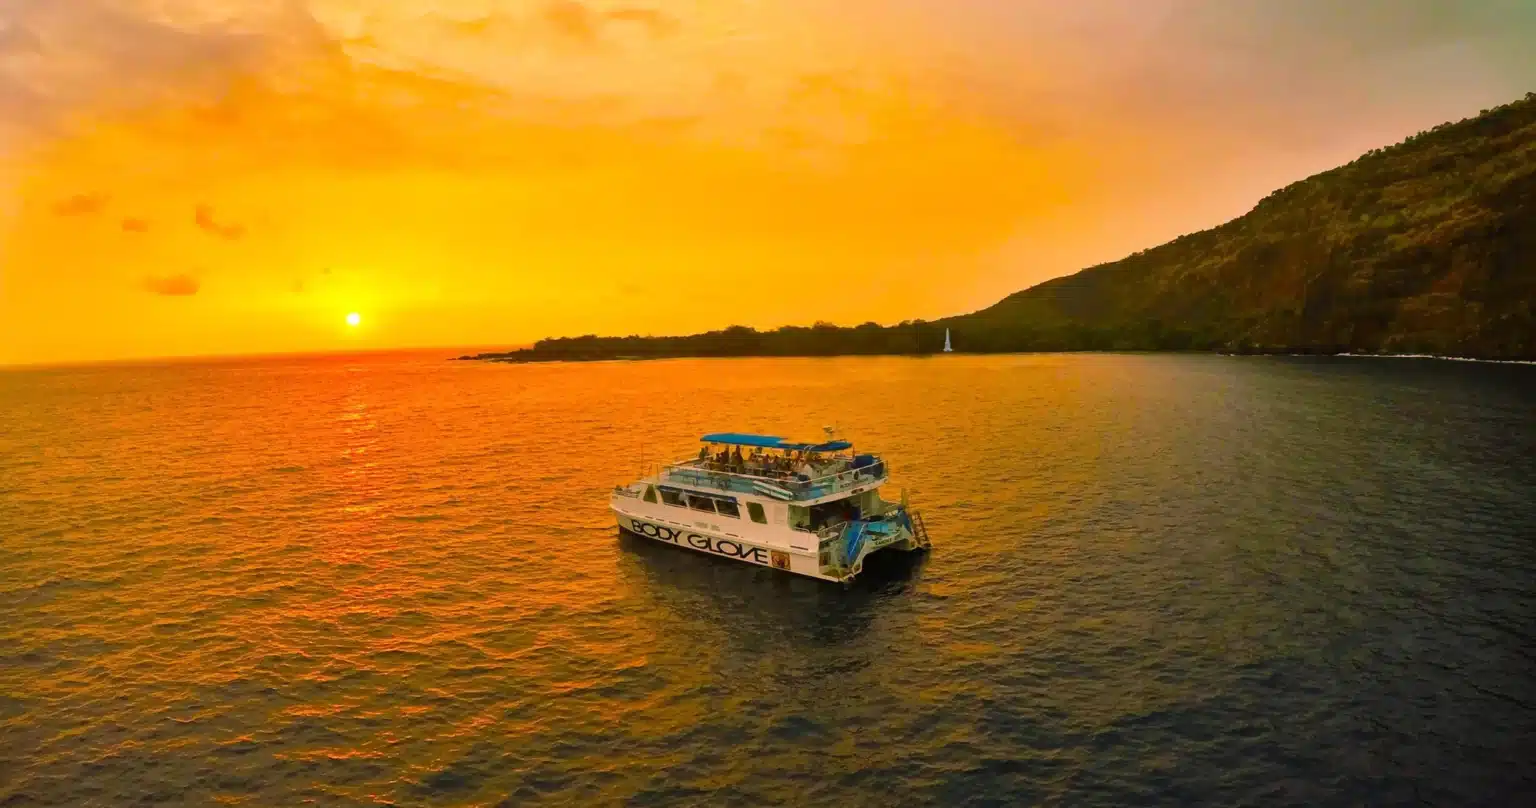 Historical Dinner Cruise: Boat Activity Tour in the town of Kailua-Kona on Big Island